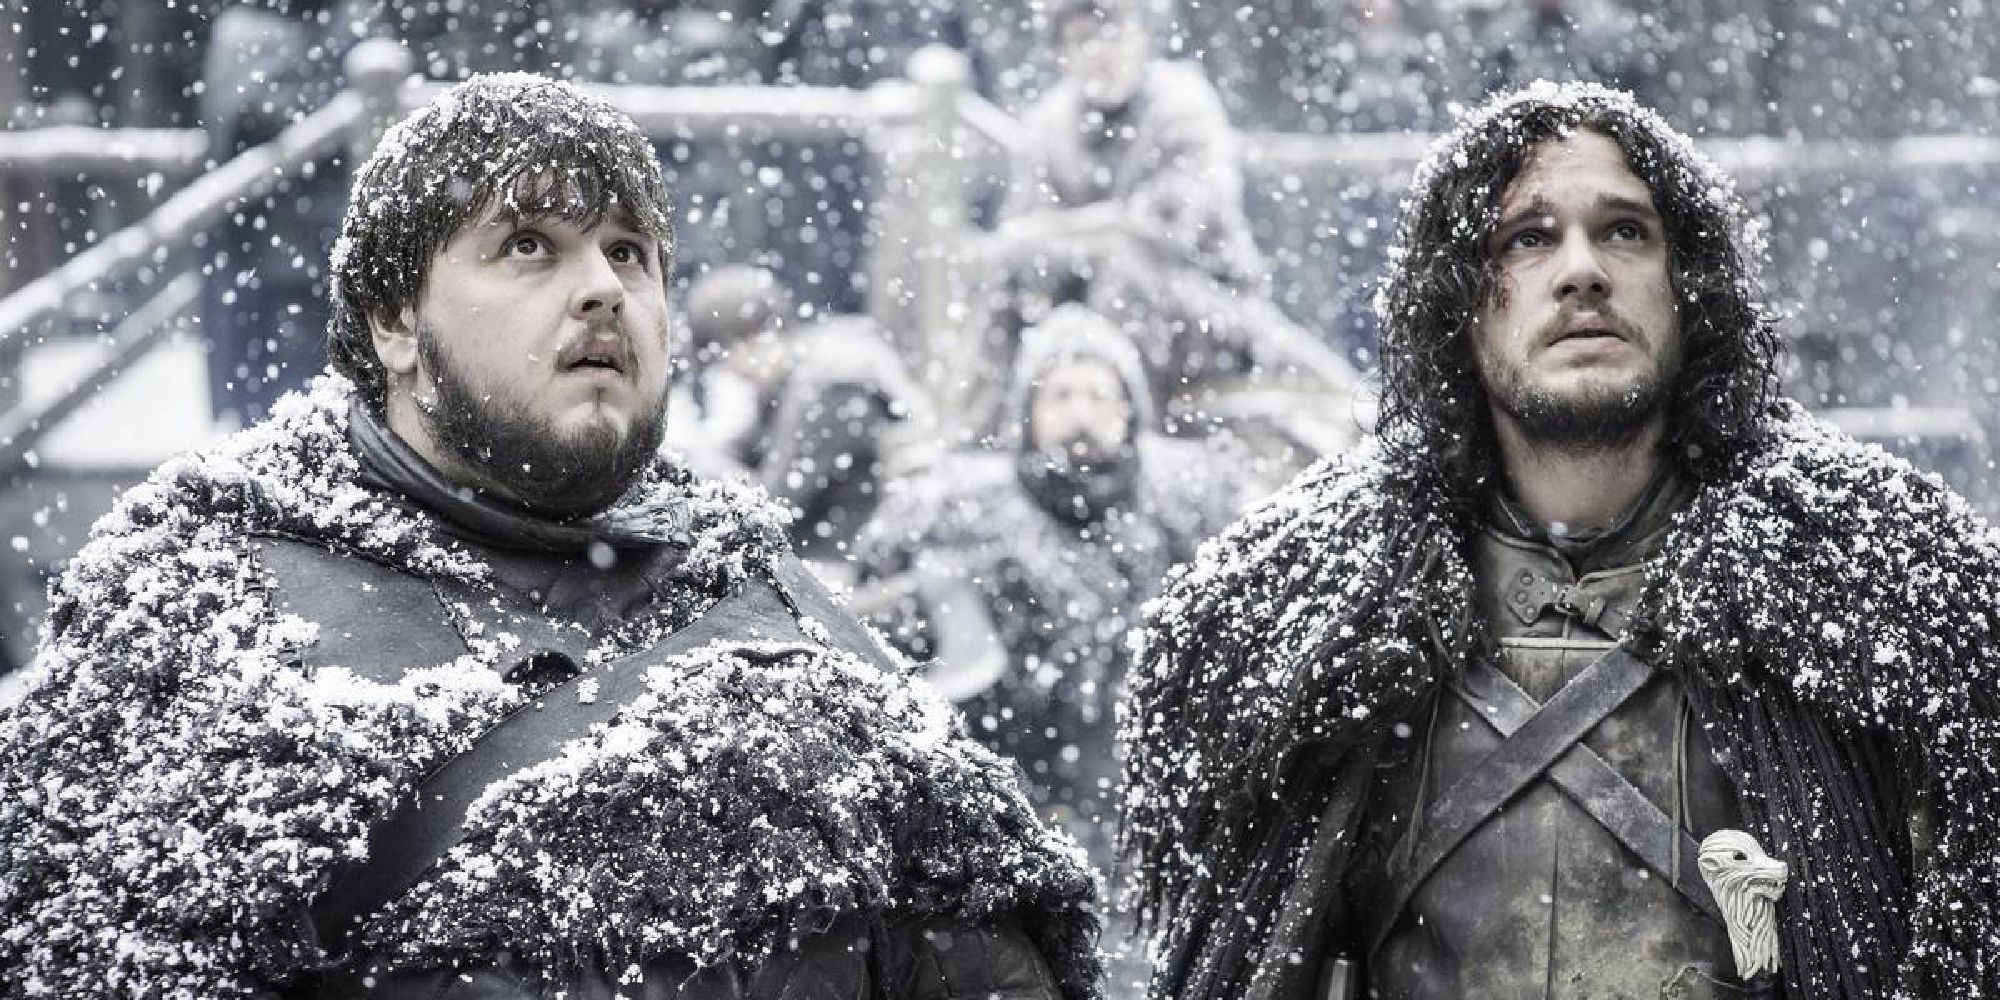 Jon Snow standing in the Castle Black courtyard with Samwell Tarly as it snows in Game of Thrones.